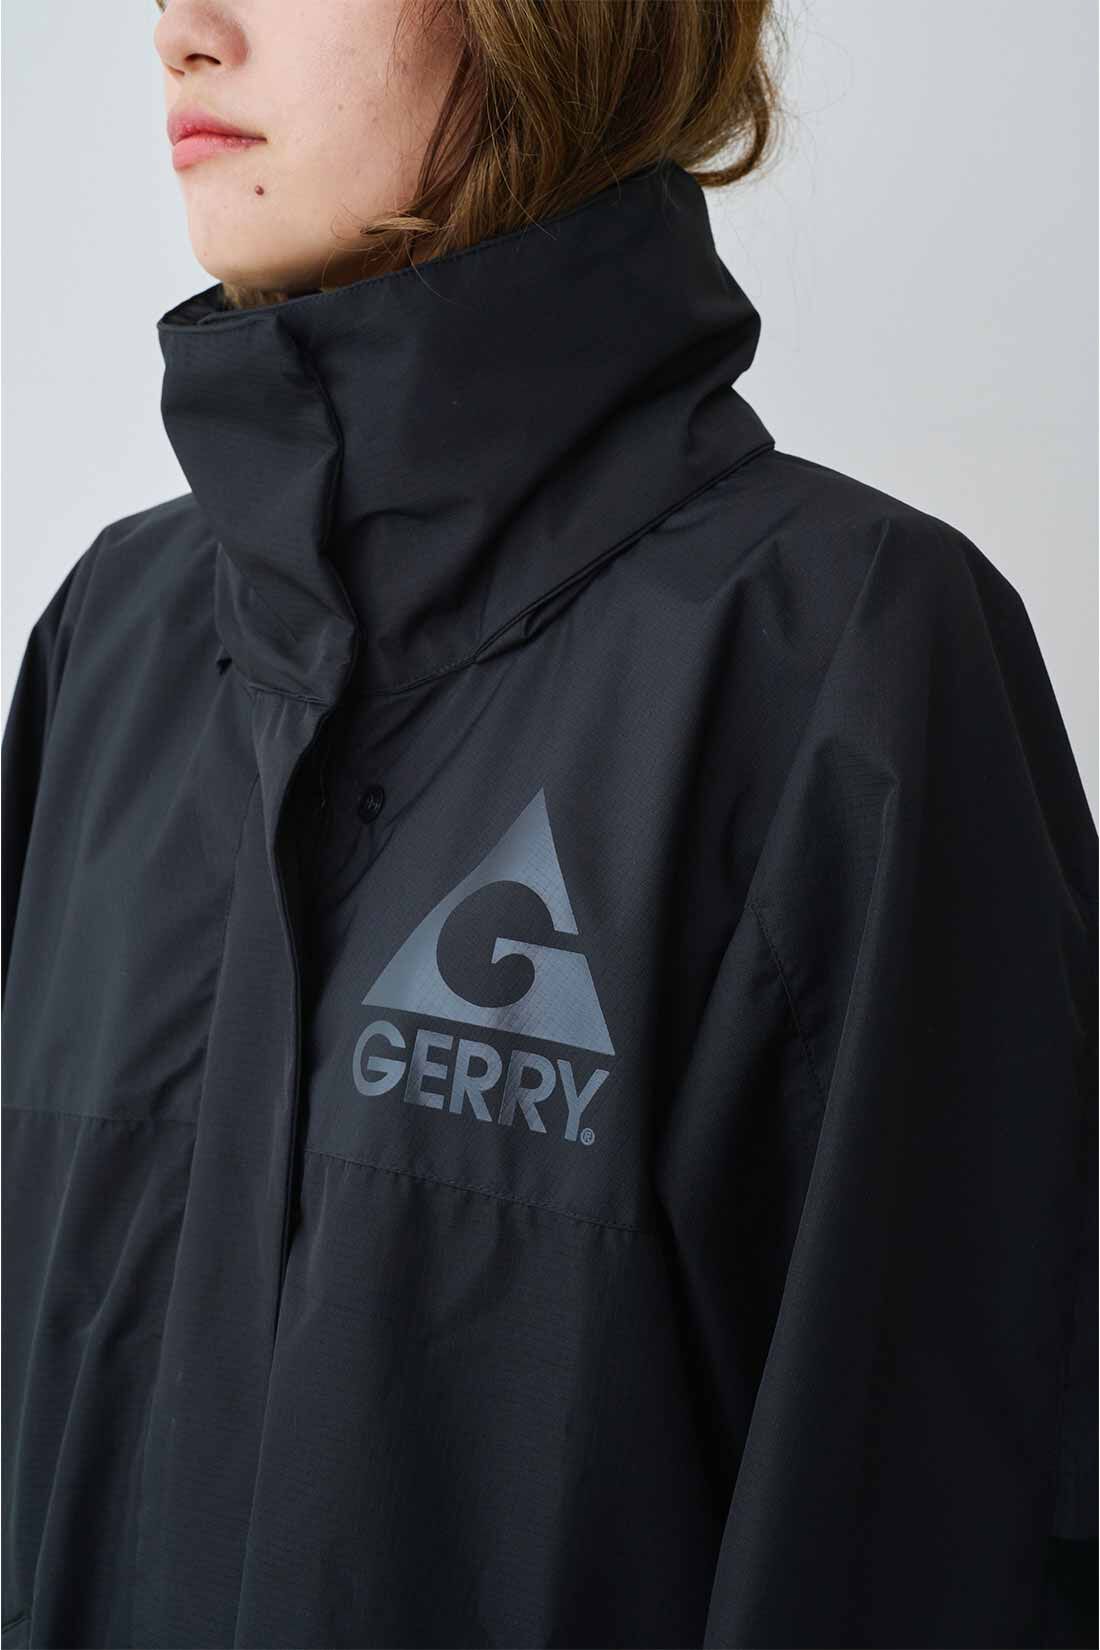 Real Stock|GERRY（R） for MEDE19F　2レイヤー素材のミリタリーコート〈ブラック〉